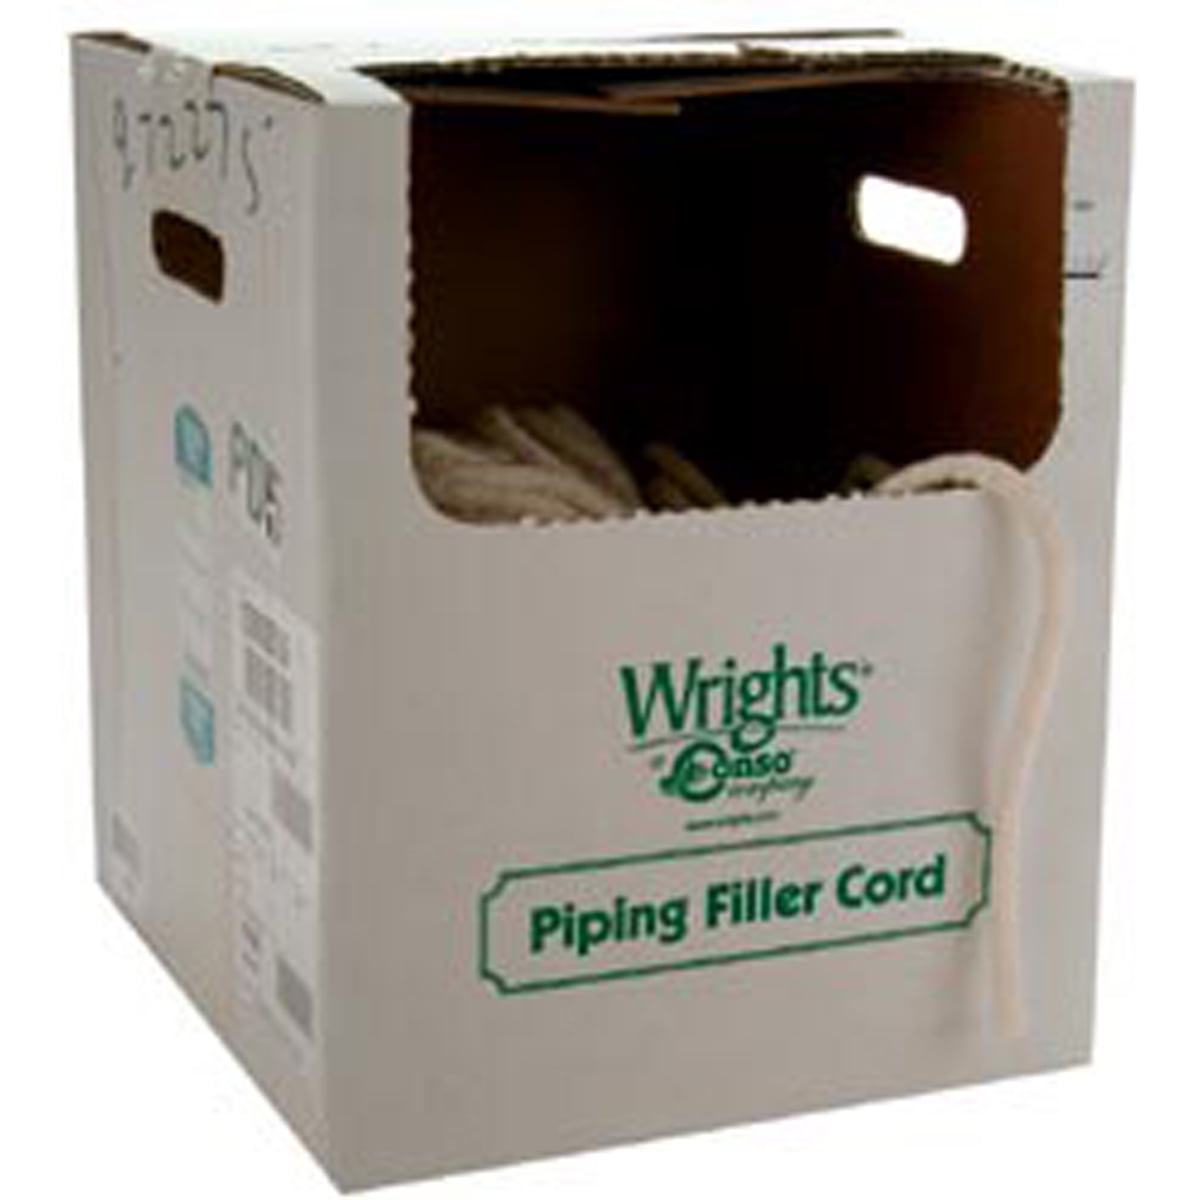 Wrights Cotton Piping Filler Cord Size 6